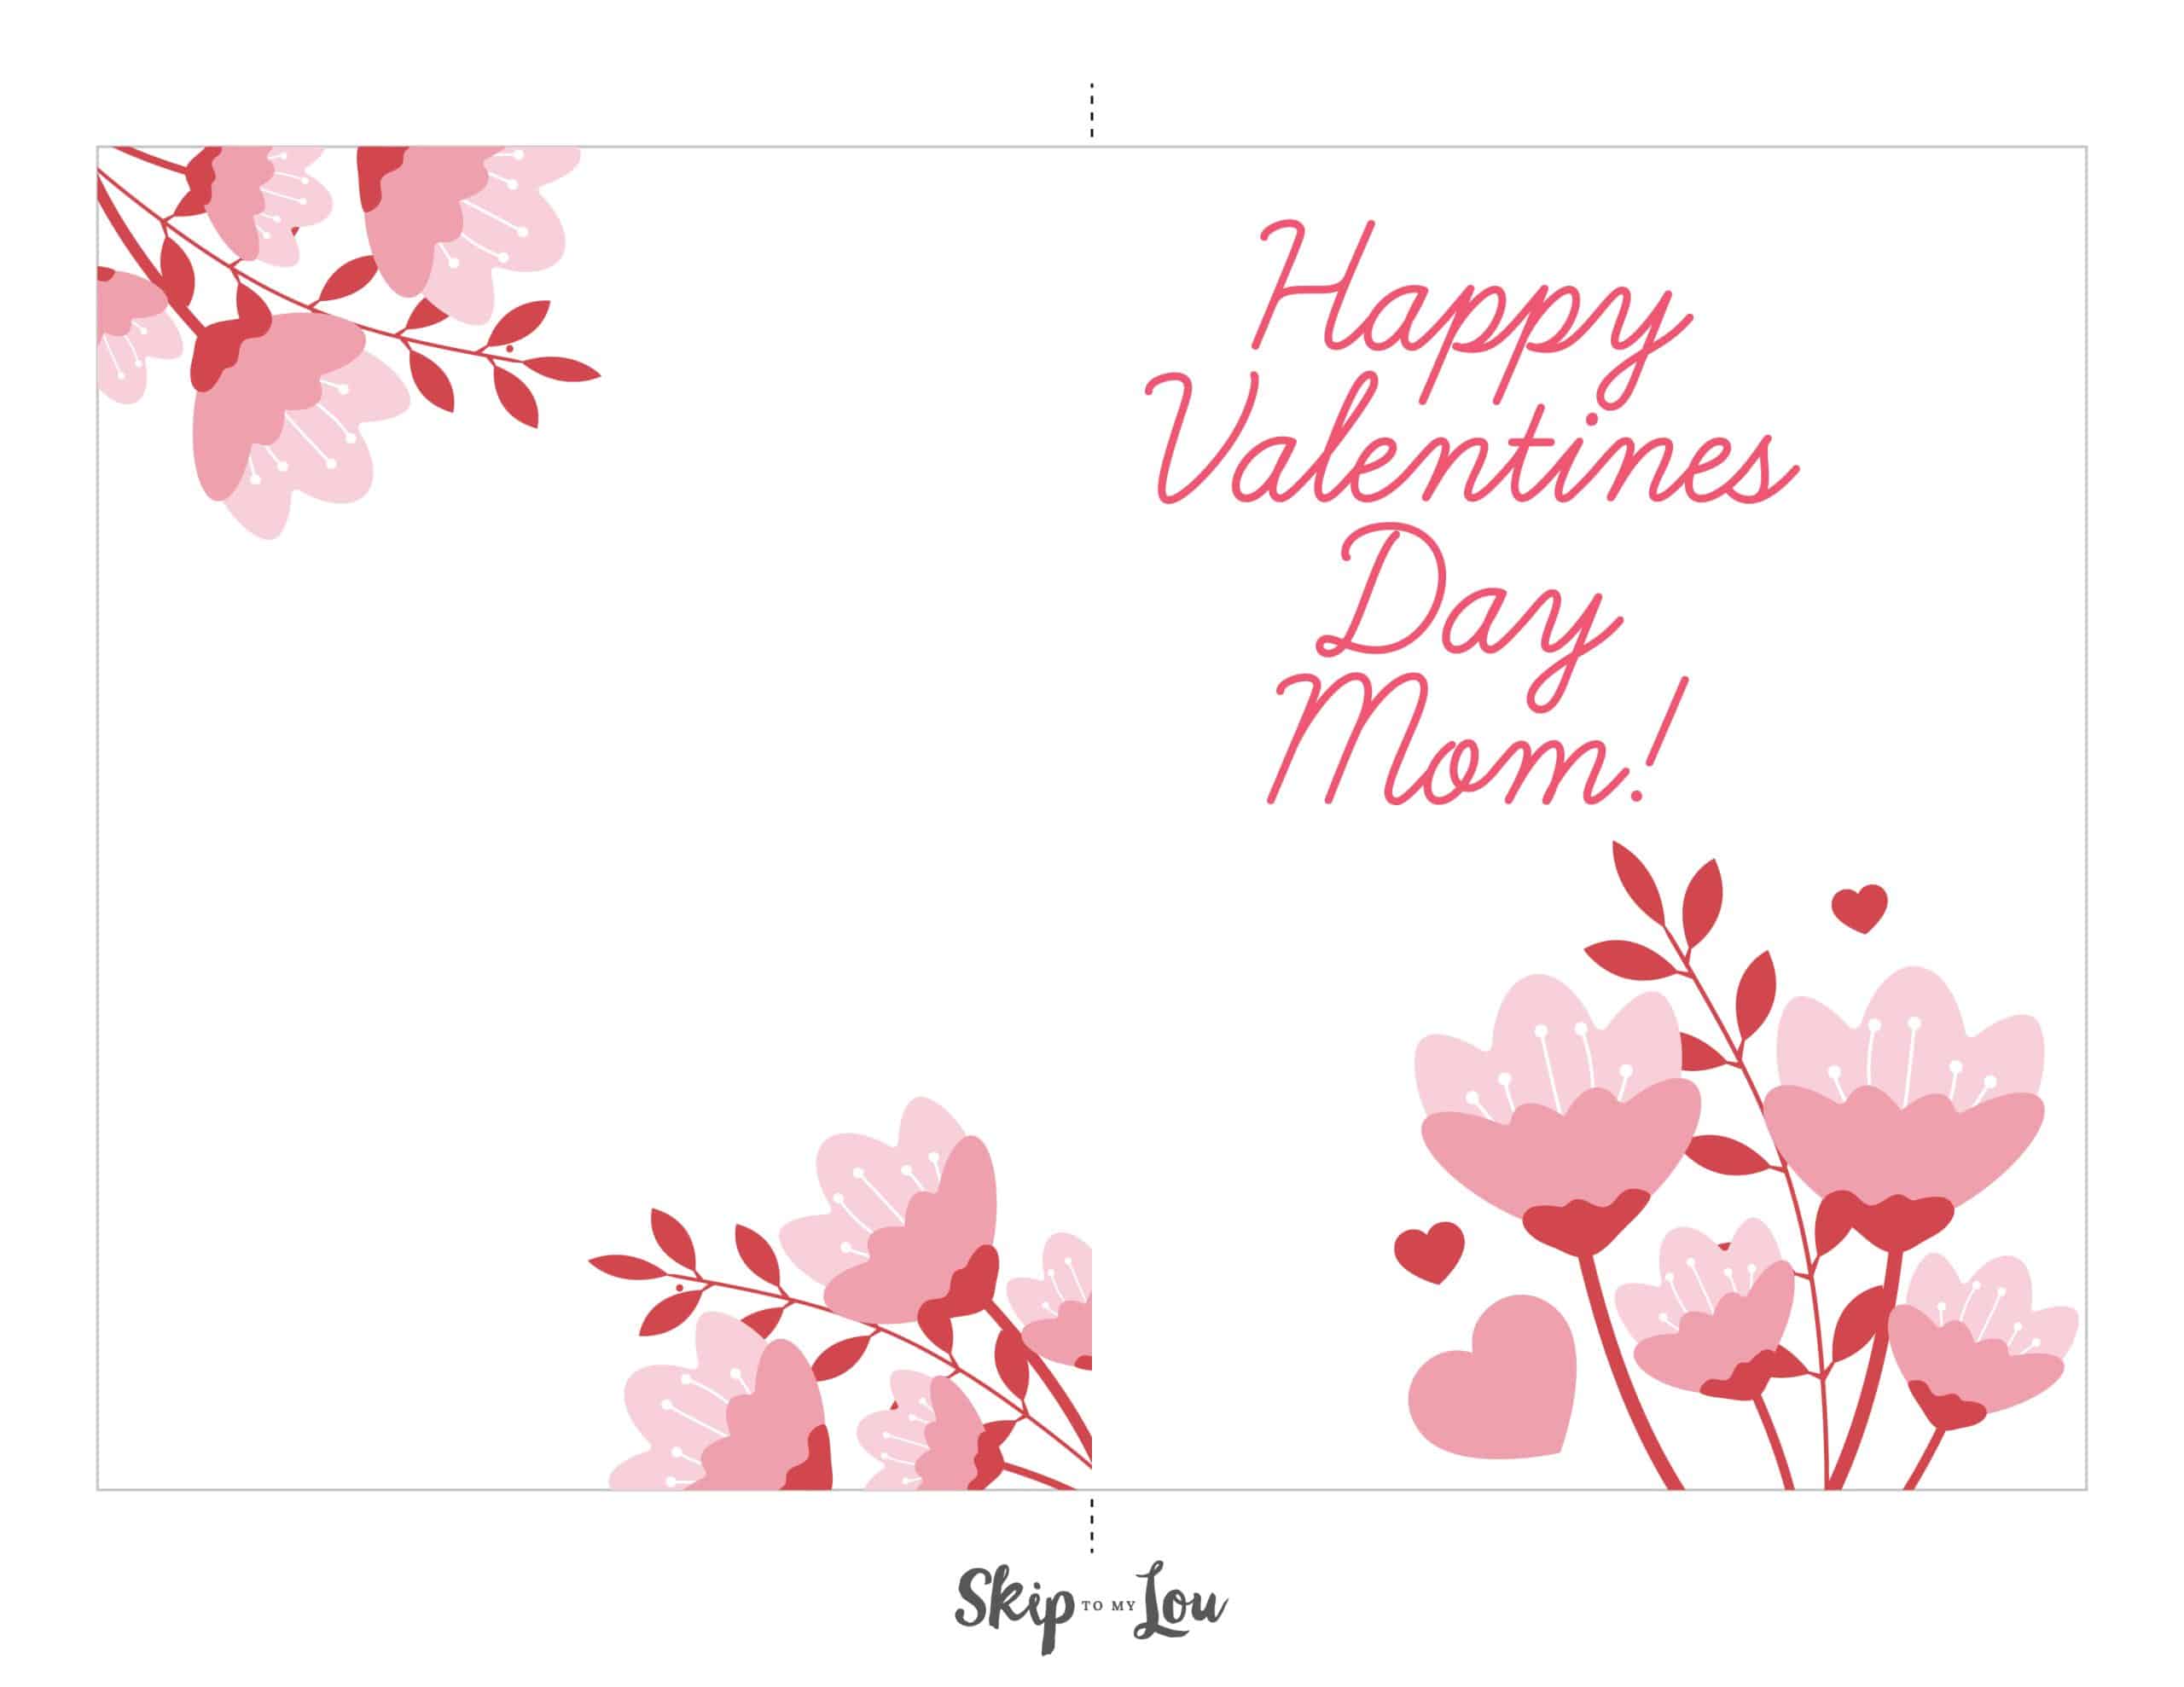 Happy Valentine's day mom! in a white background with flowers ink pink and red